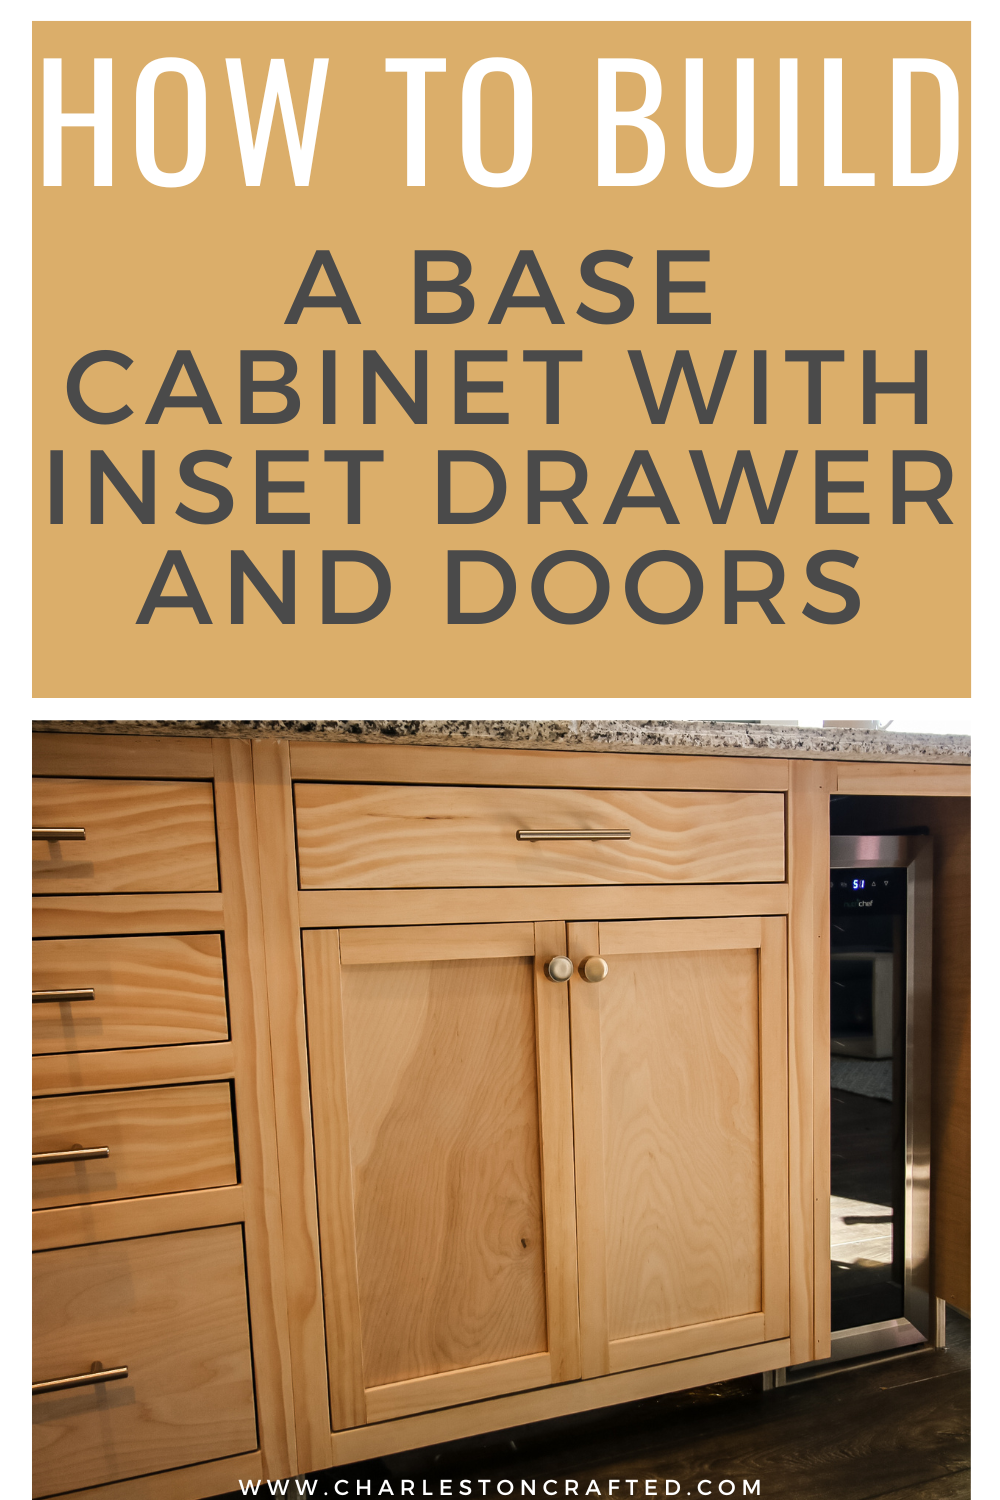 Base cabinet with inset drawer and doors - Charleston Crafted